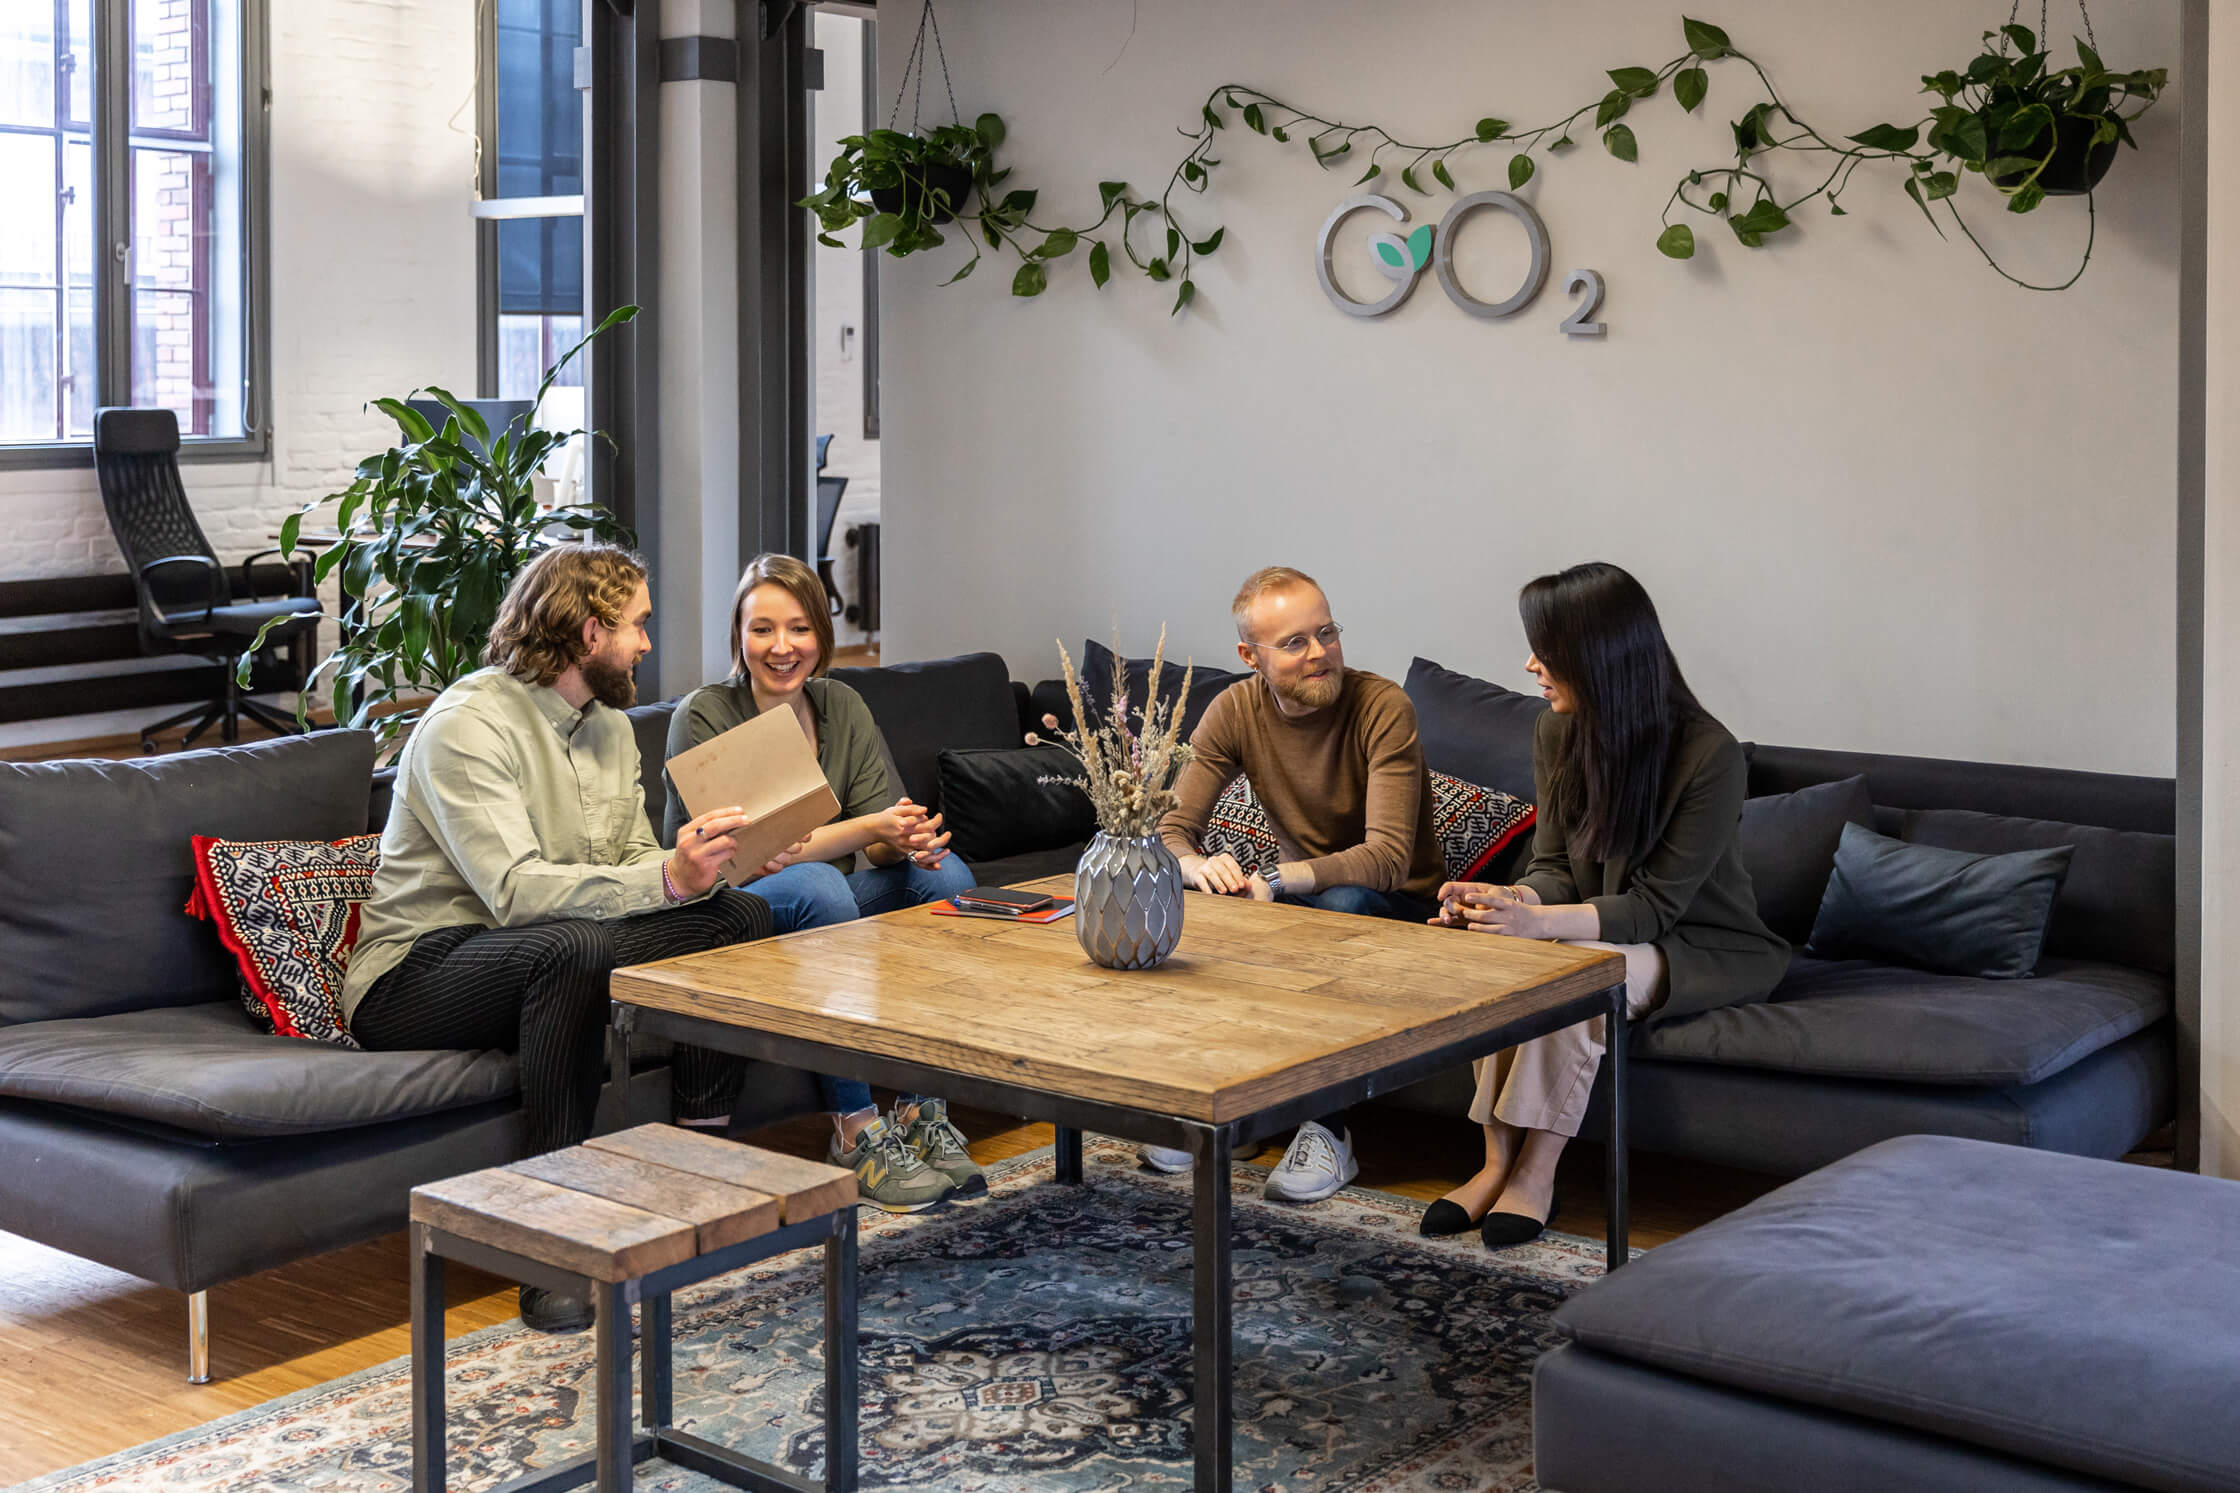 Four people sitting on a couch and talking with each other in an office